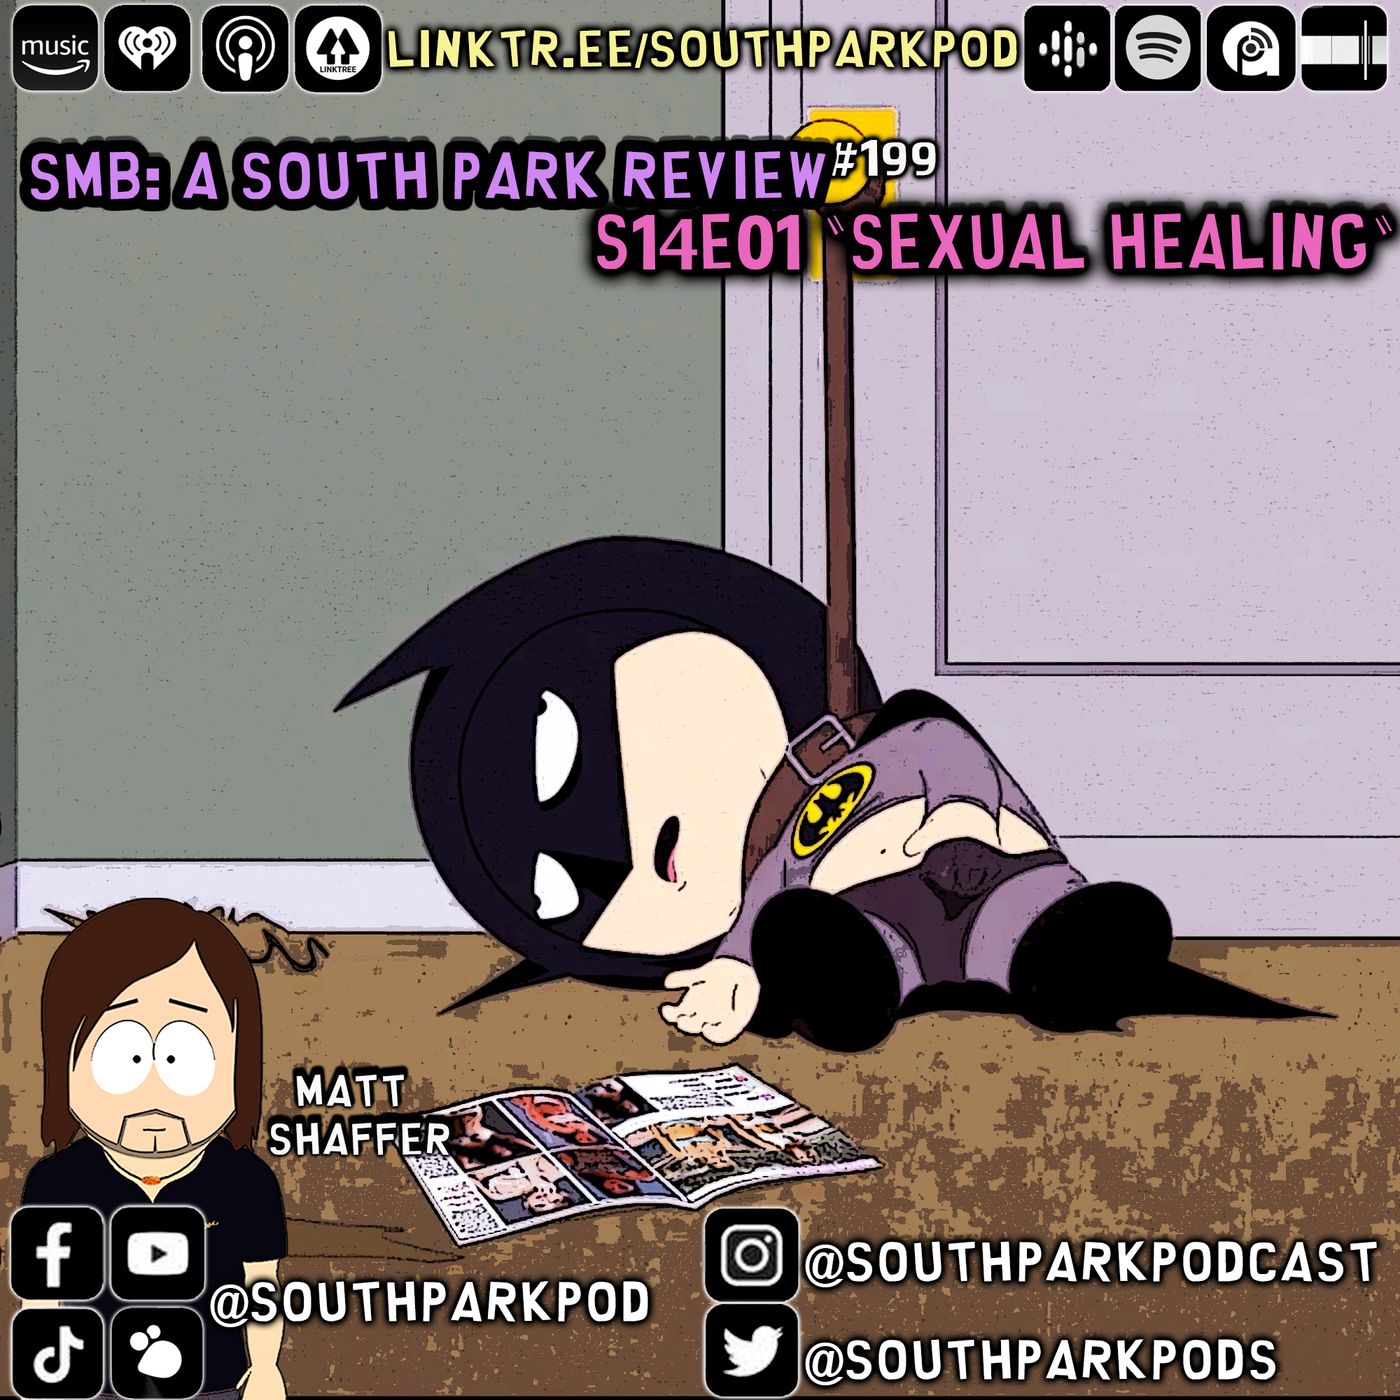 SMB #199 - S14E1 Sexual Healing - ”Yeah Dude, EA Sports Outdid Themselves This Time.”